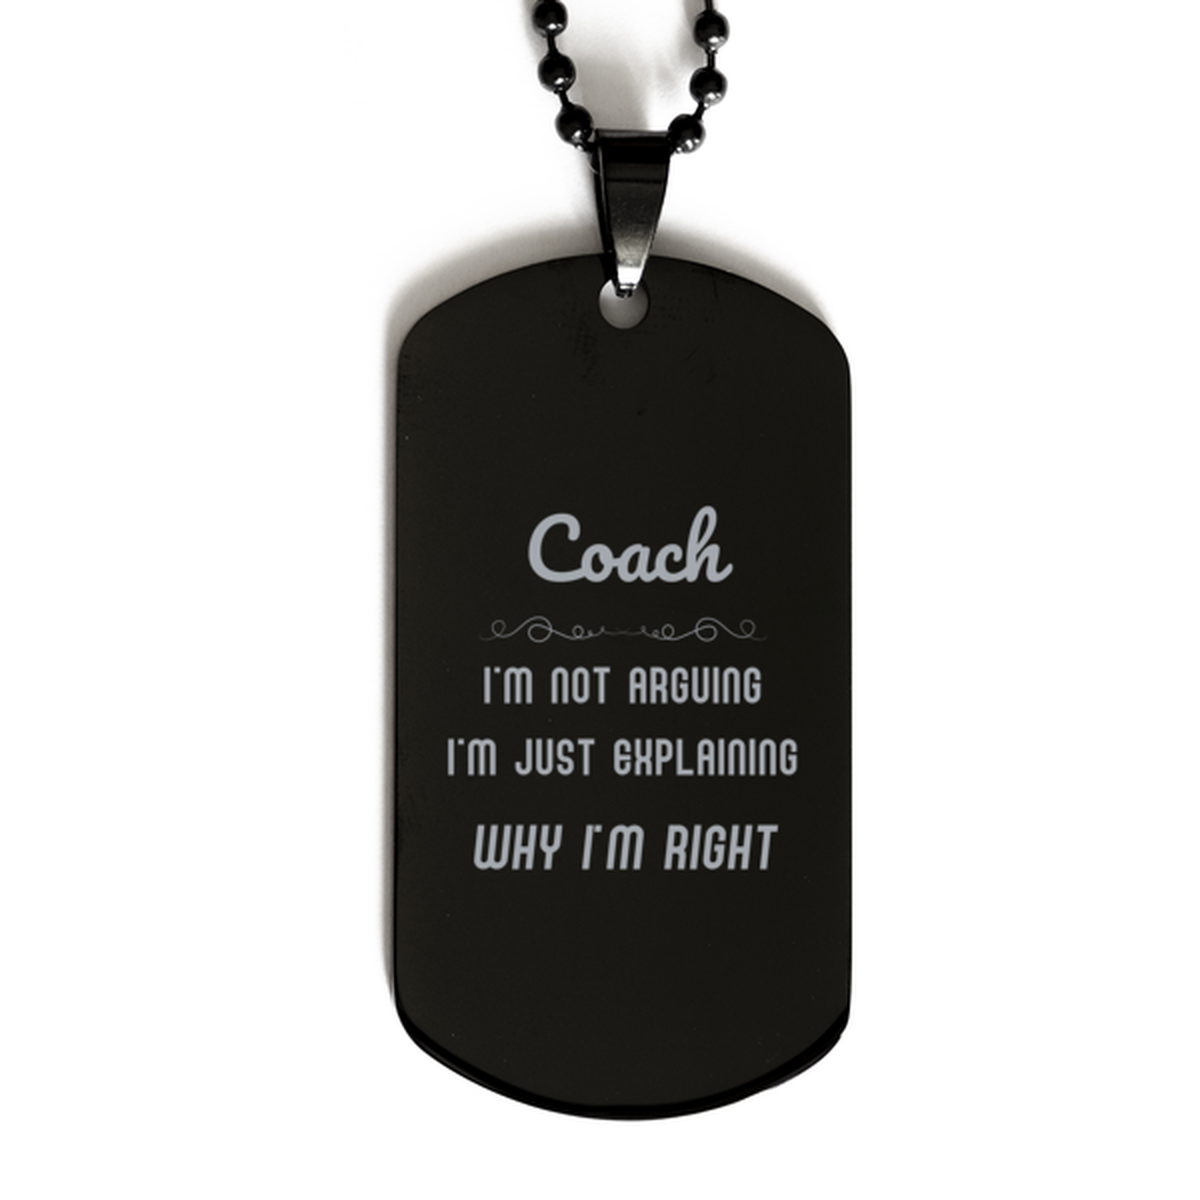 Coach I'm not Arguing. I'm Just Explaining Why I'm RIGHT Black Dog Tag, Funny Saying Quote Coach Gifts For Coach Graduation Birthday Christmas Gifts for Men Women Coworker